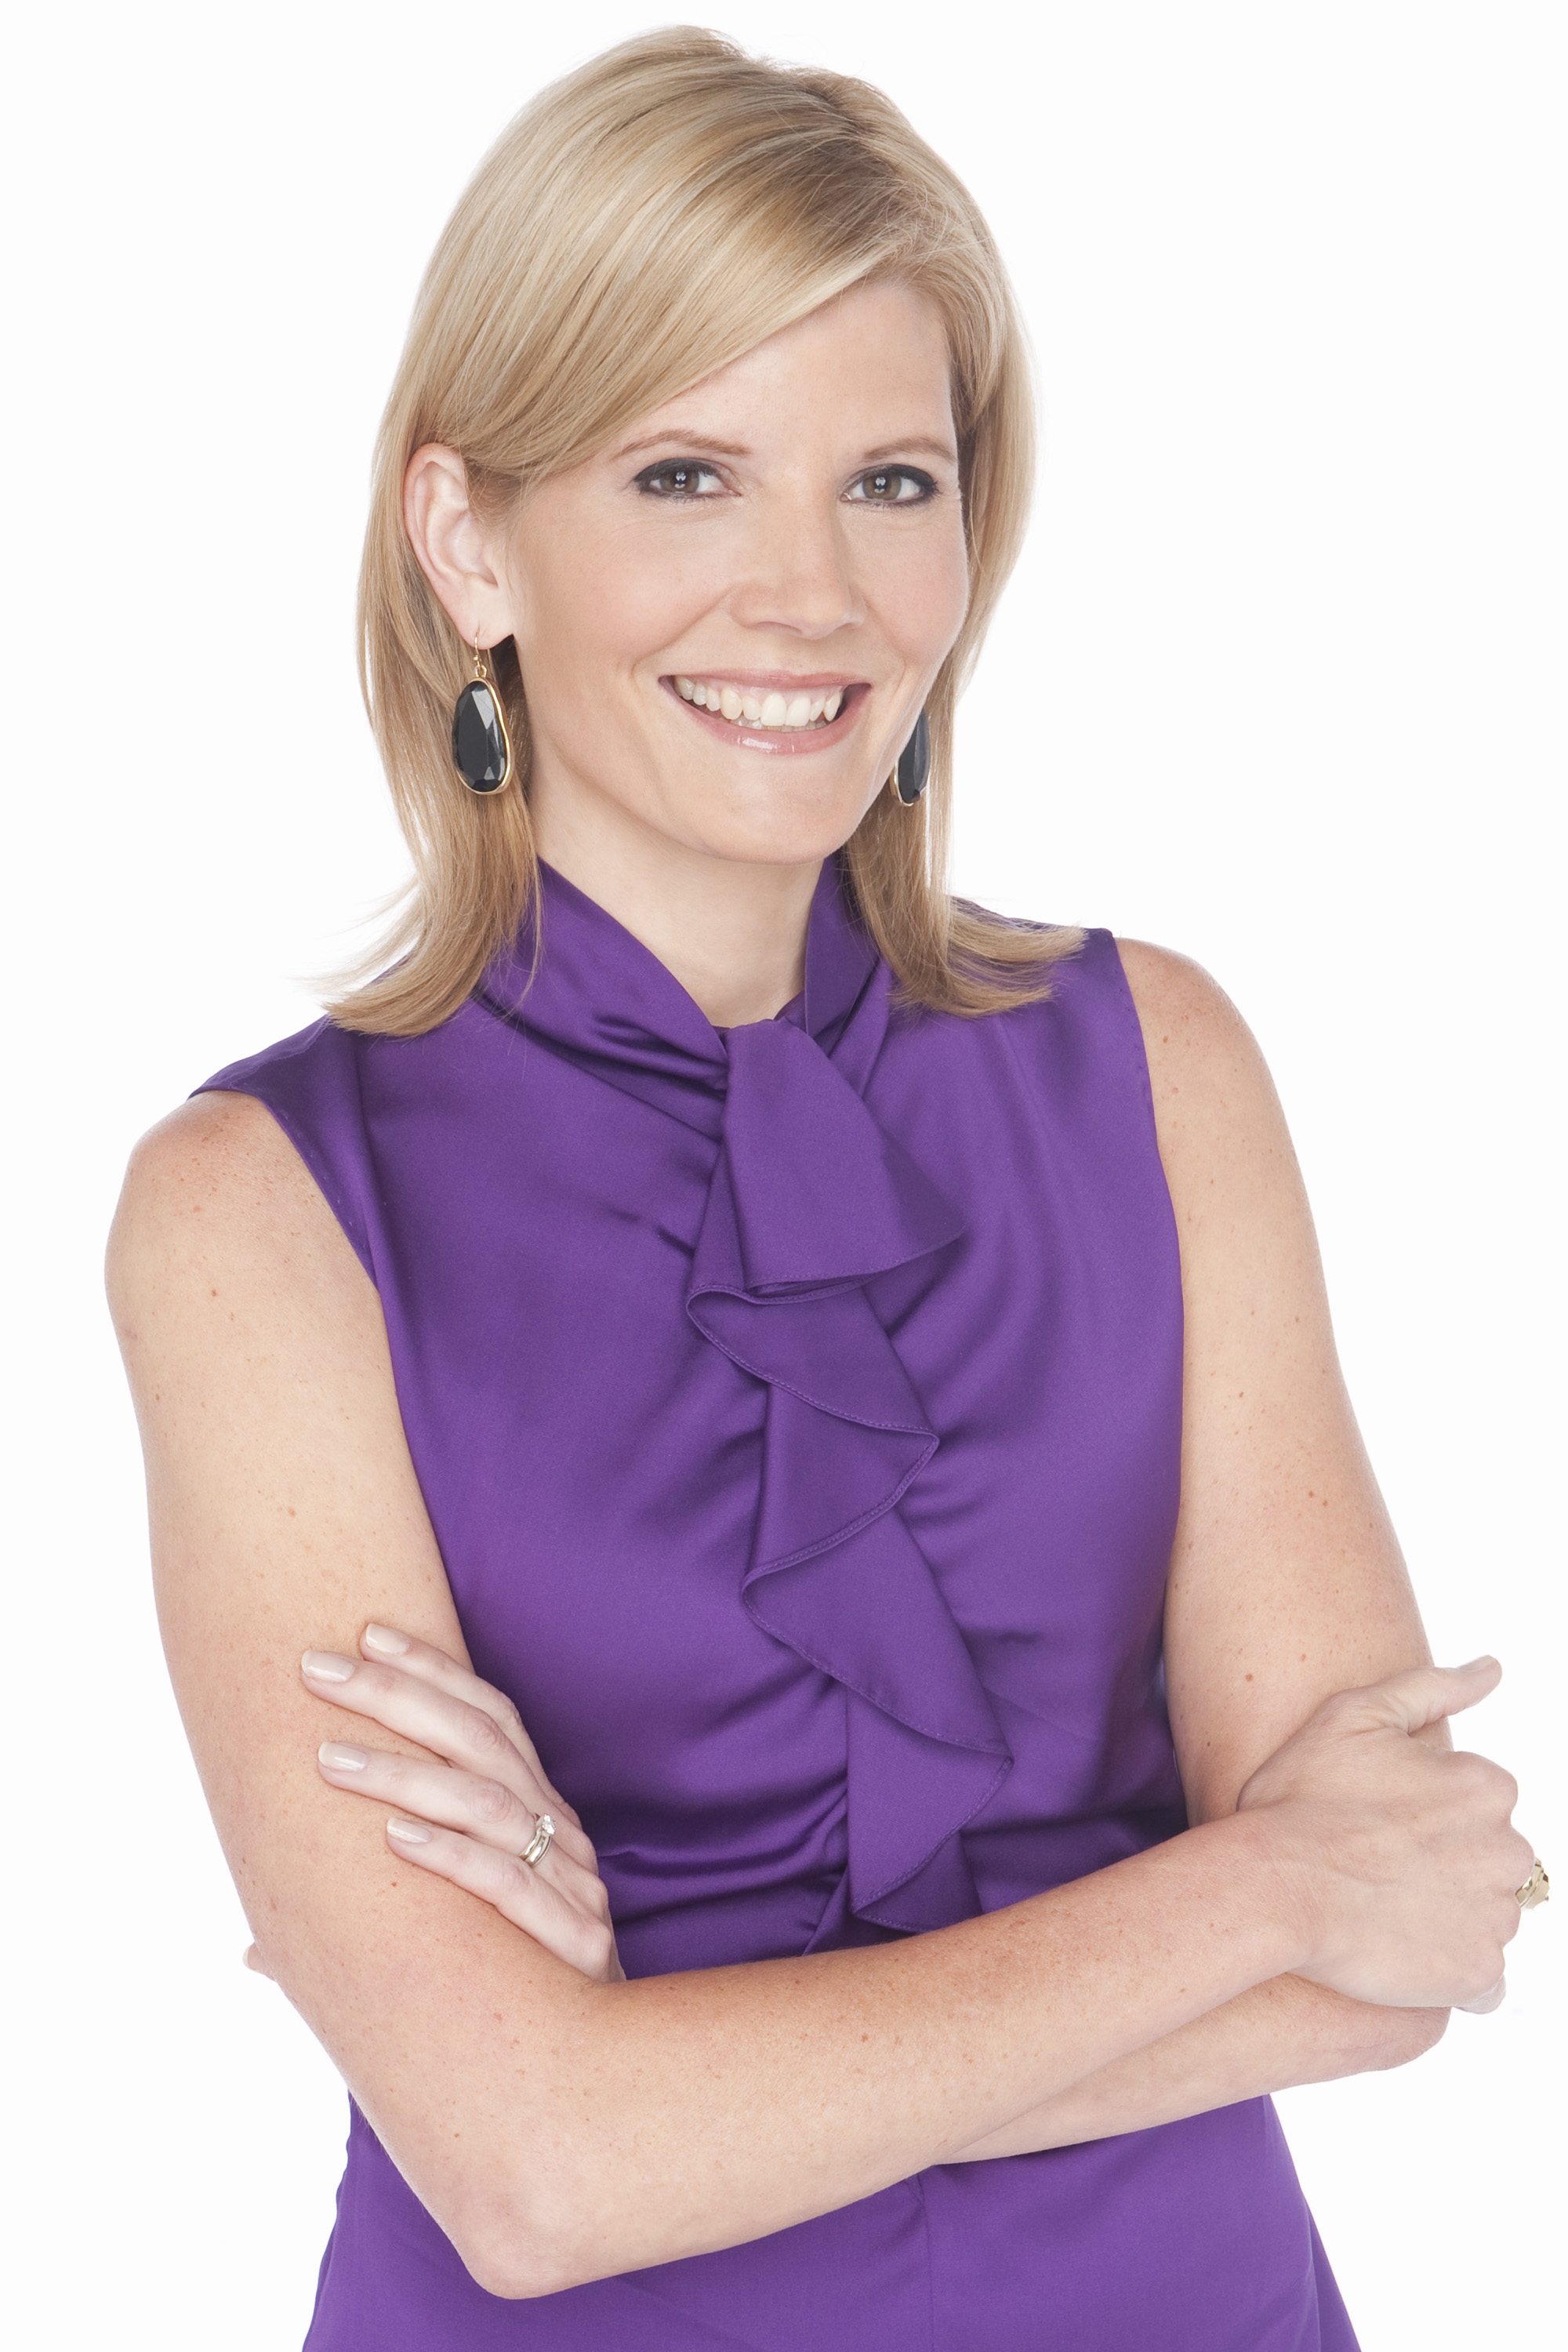 Kate Snow Will Host the Smart Kids Gala on April 25